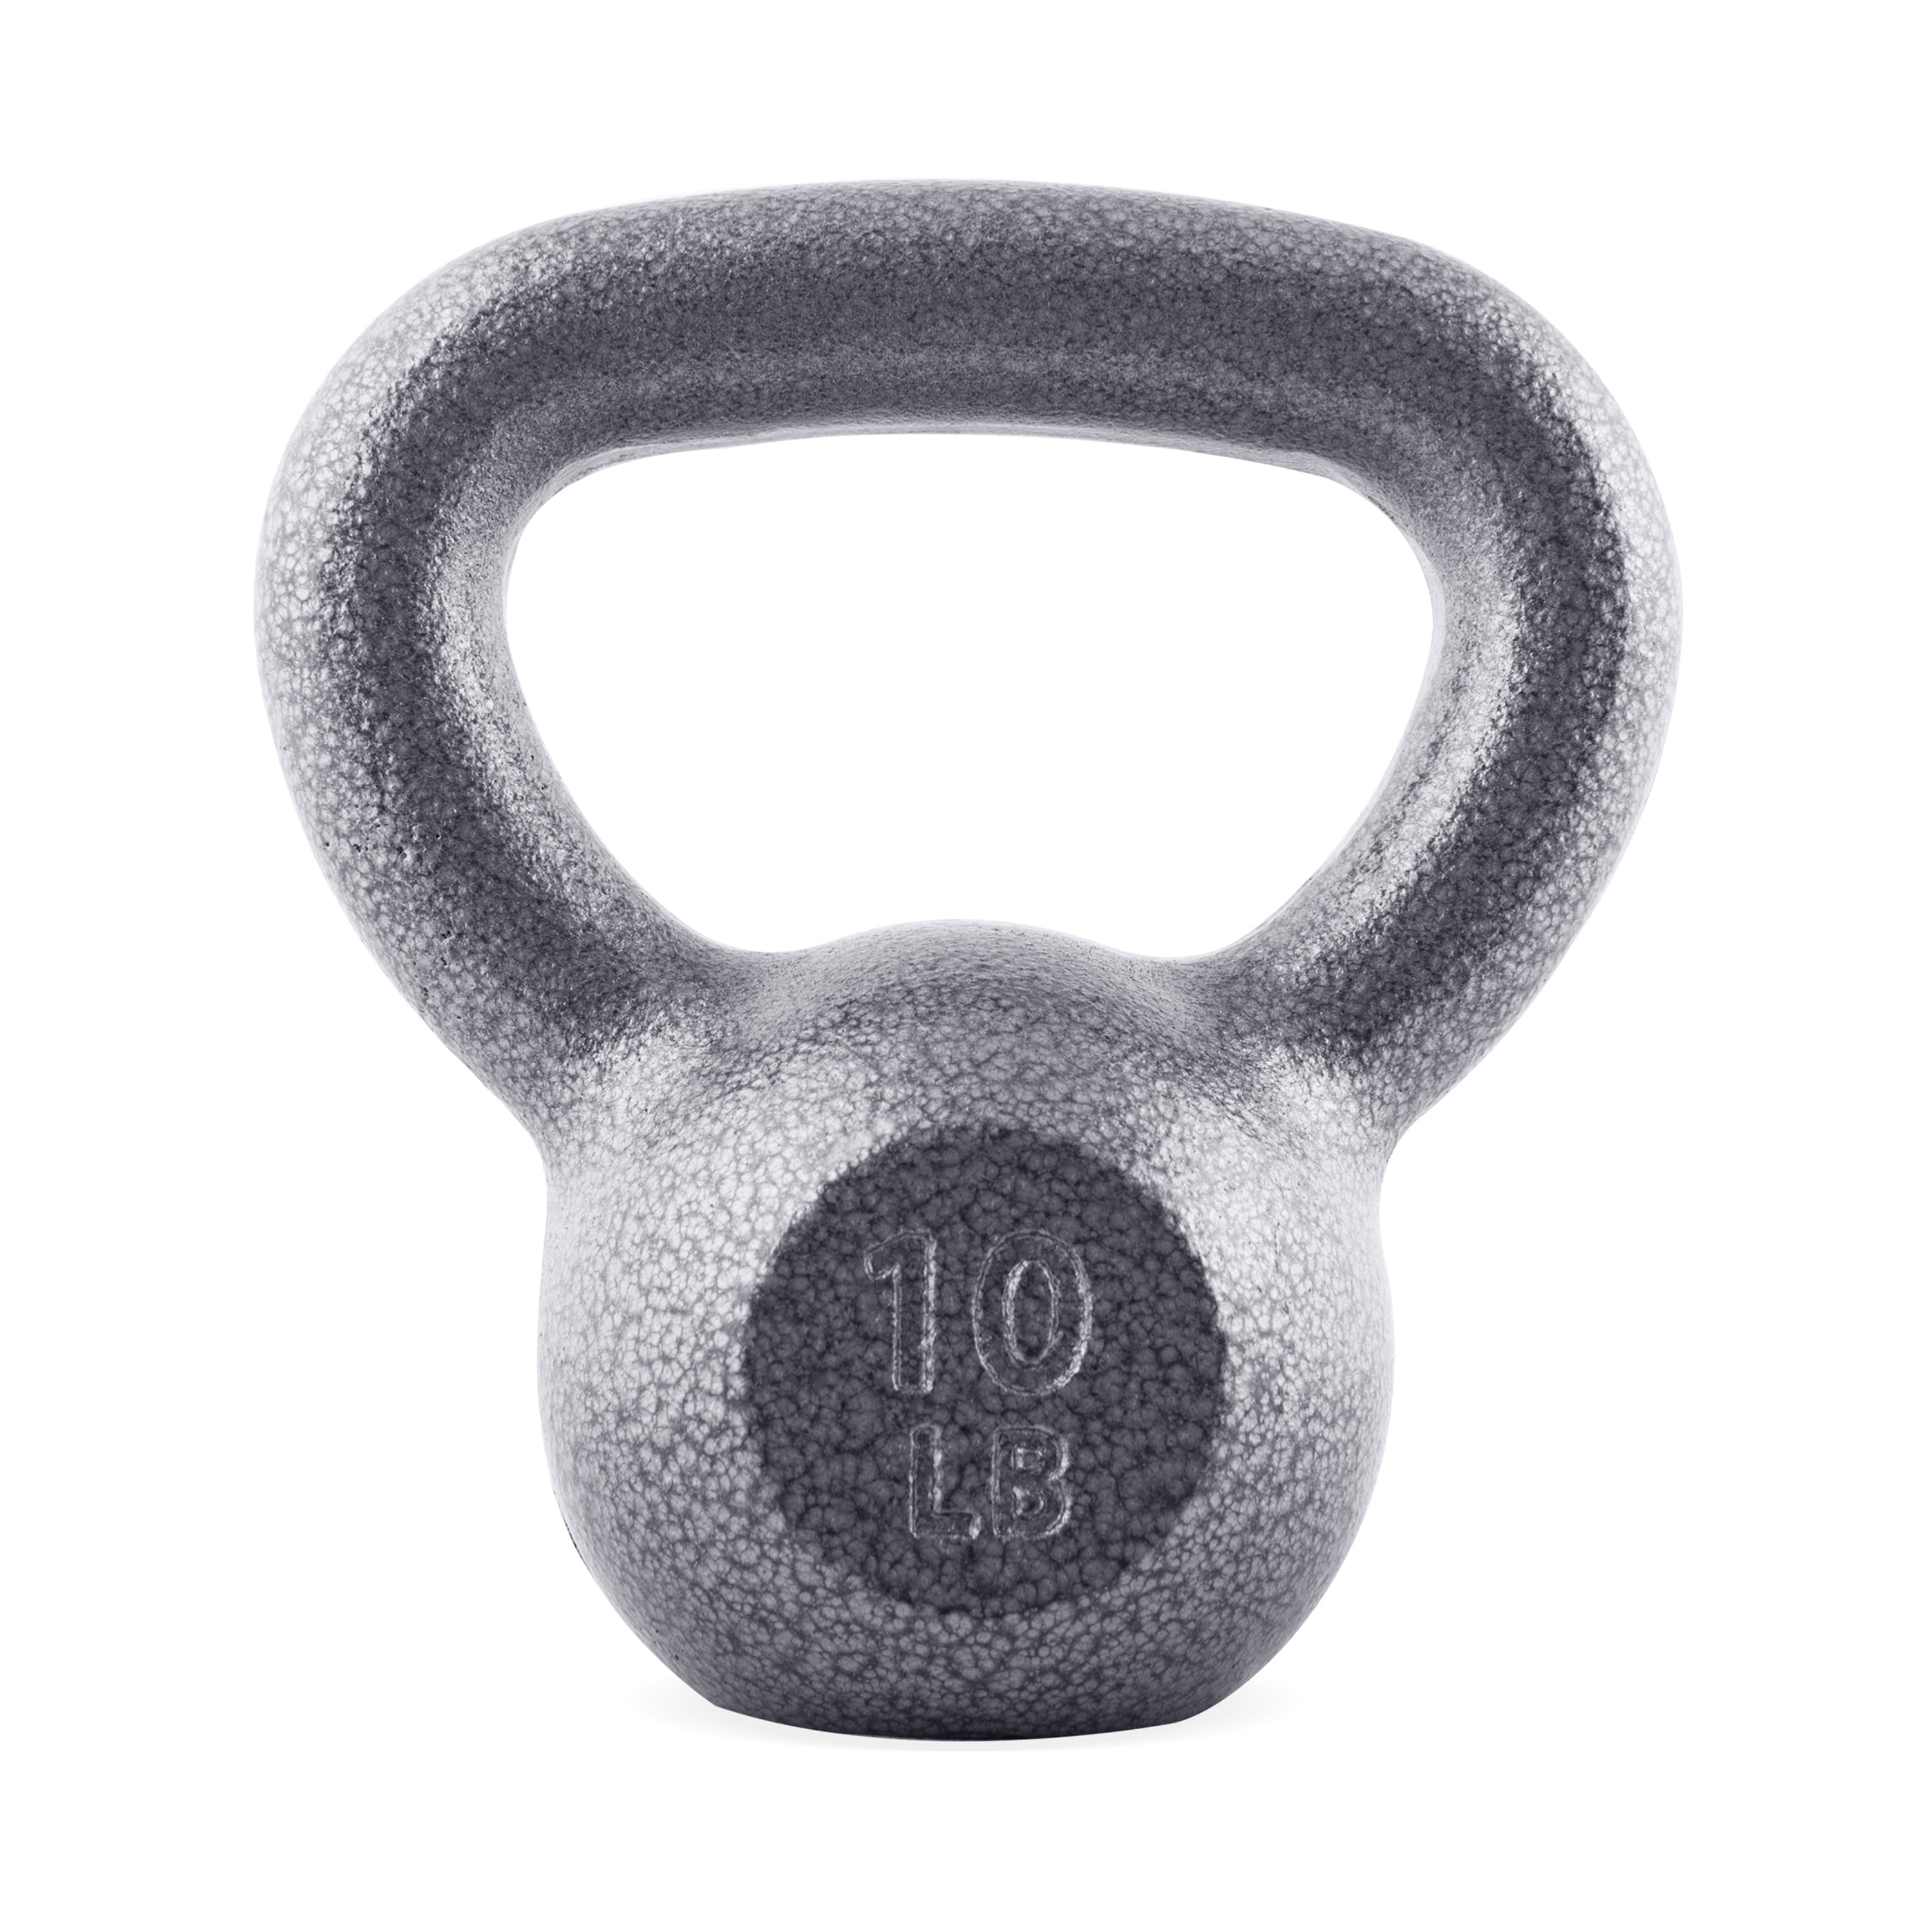 Cast Iron Kettlebell Weight Strength Training Fitness Exercise Workout 10-80 lbs 